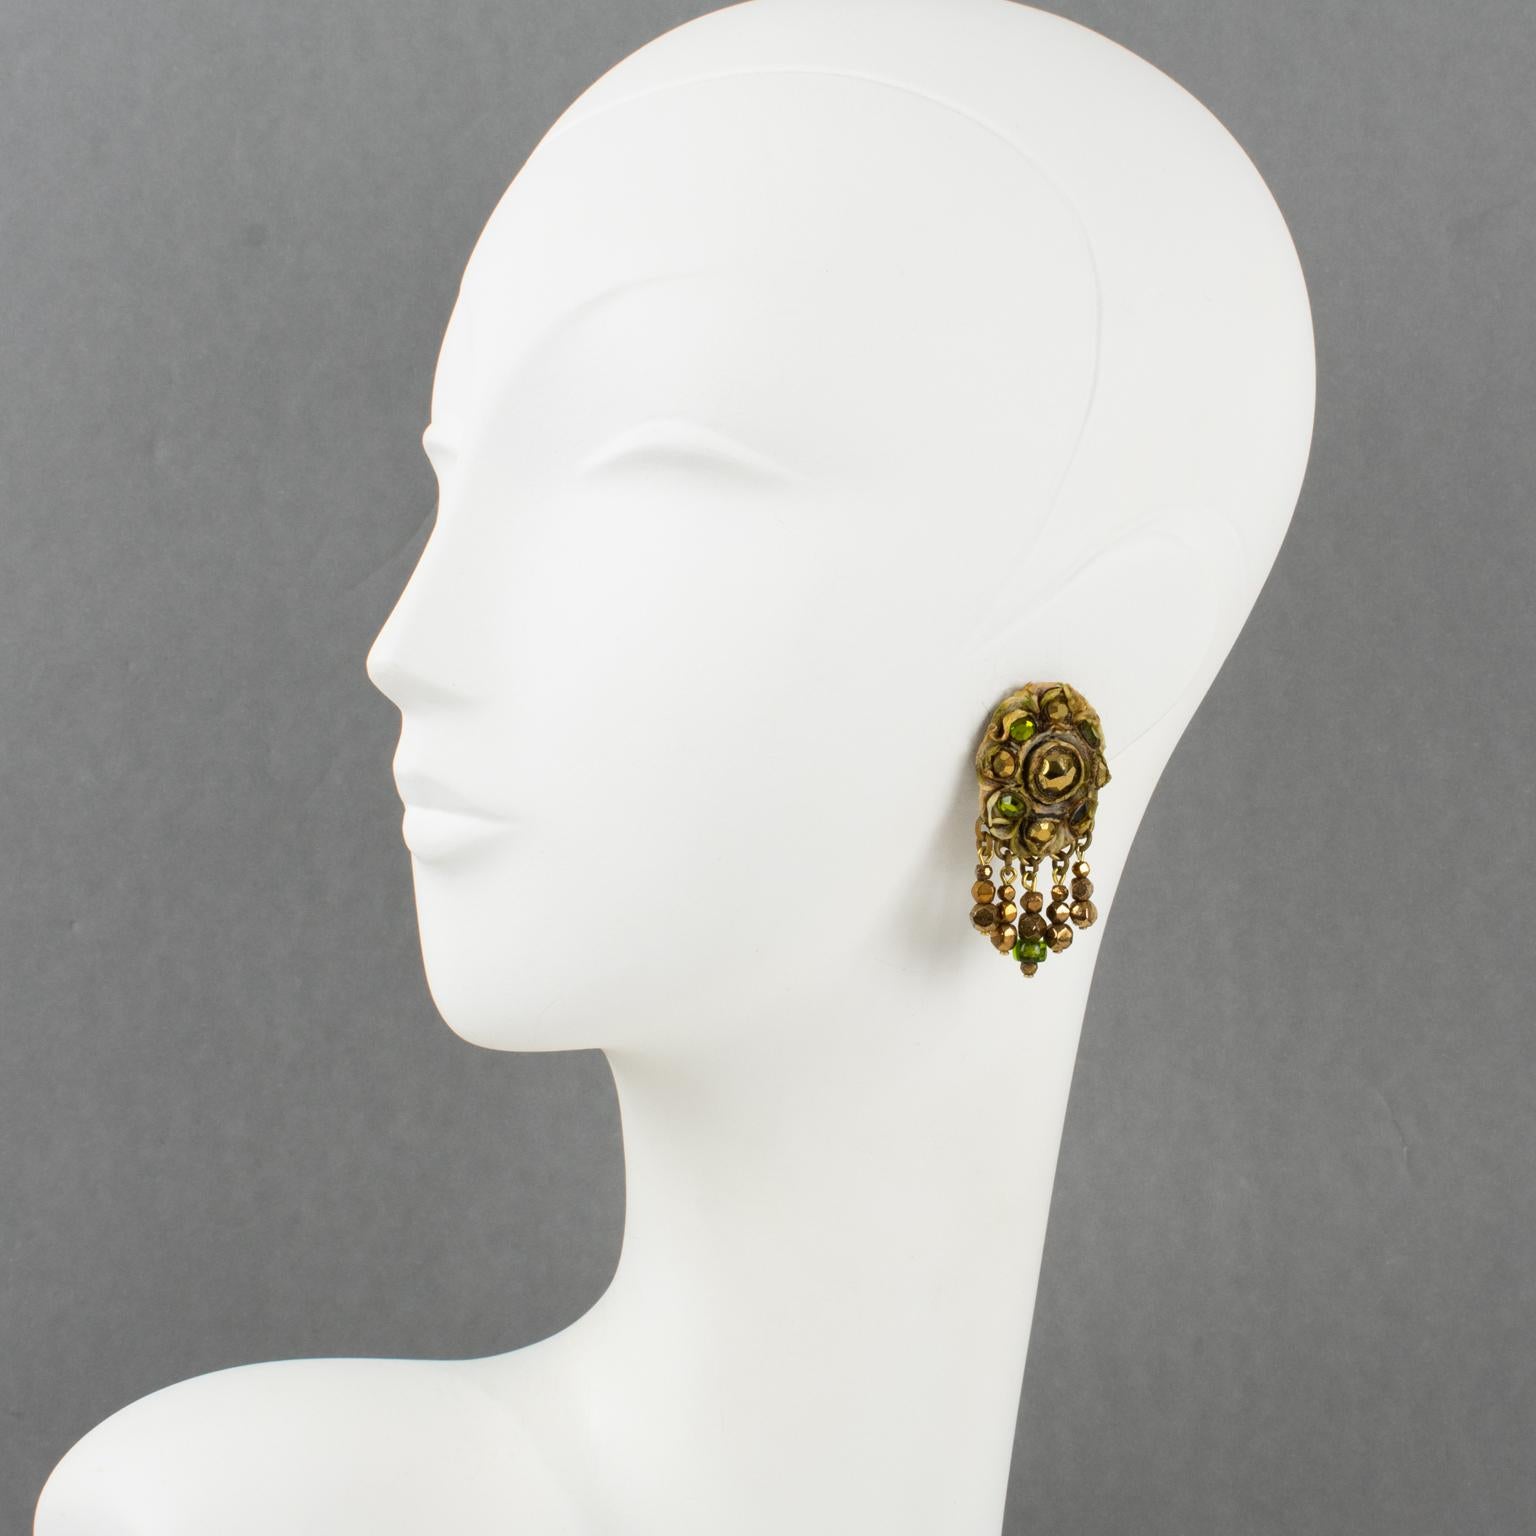 French jewelry artist Henry Perichon (aka Henry) designed these stunning Talosel resin clip-on earrings in the 1960s. They feature a brown-beige Talosel resin framing topped with metallic bronze and green glass faceted cabochons and complimented